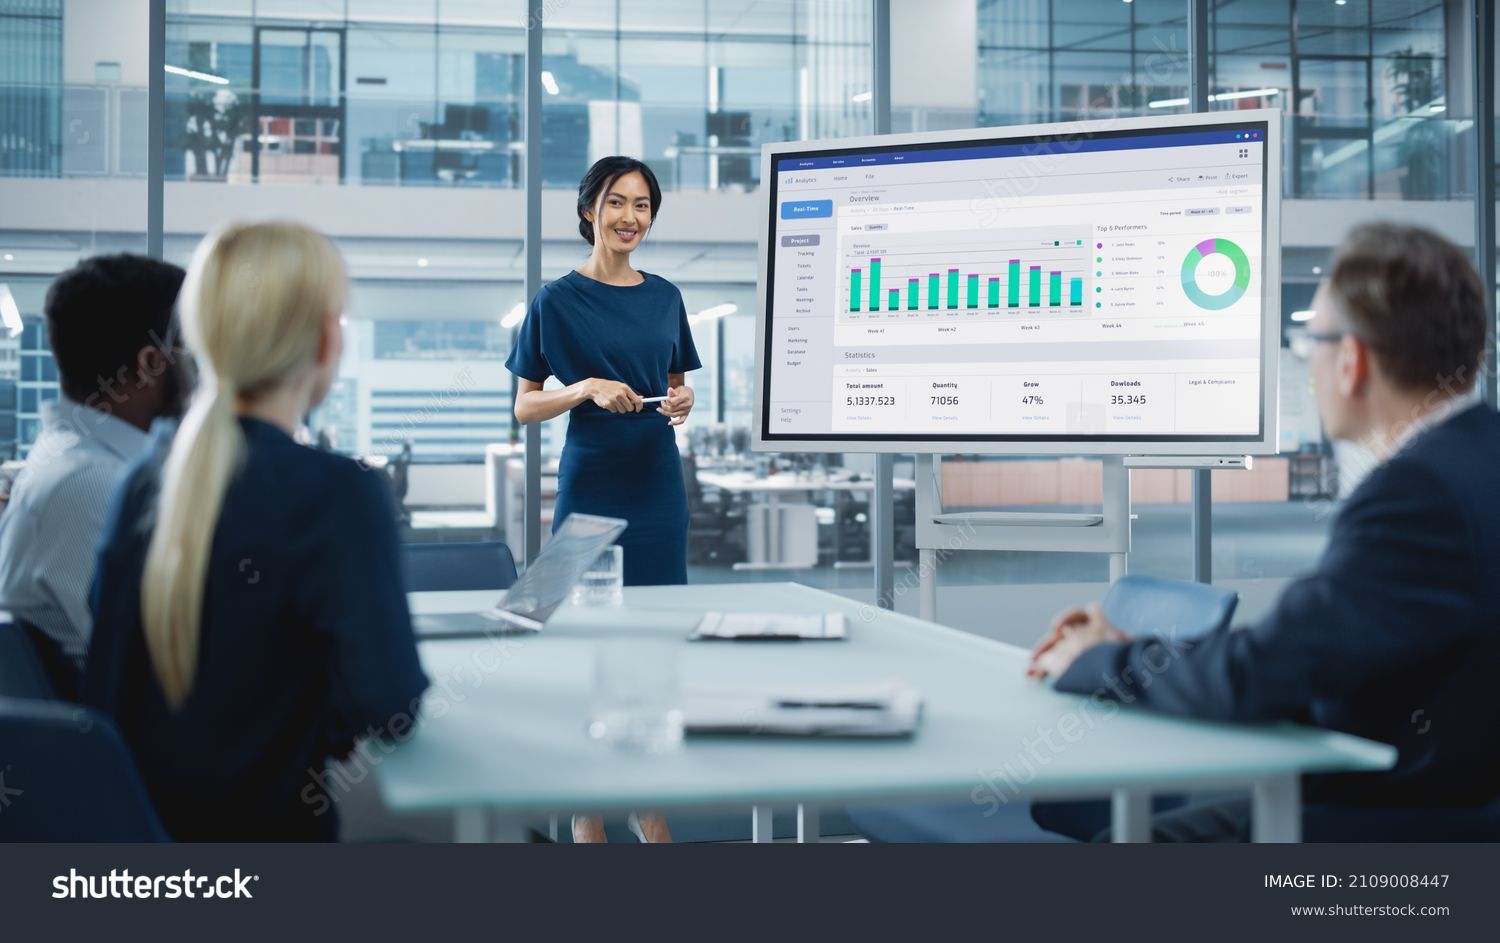 Female Operations Manager Holds Meeting Presentation for a Team of Economists. Asian Woman Uses Digital Whiteboard with Growth Analysis, Charts, Statistics and Data. People Work in Business Office. #2109008447